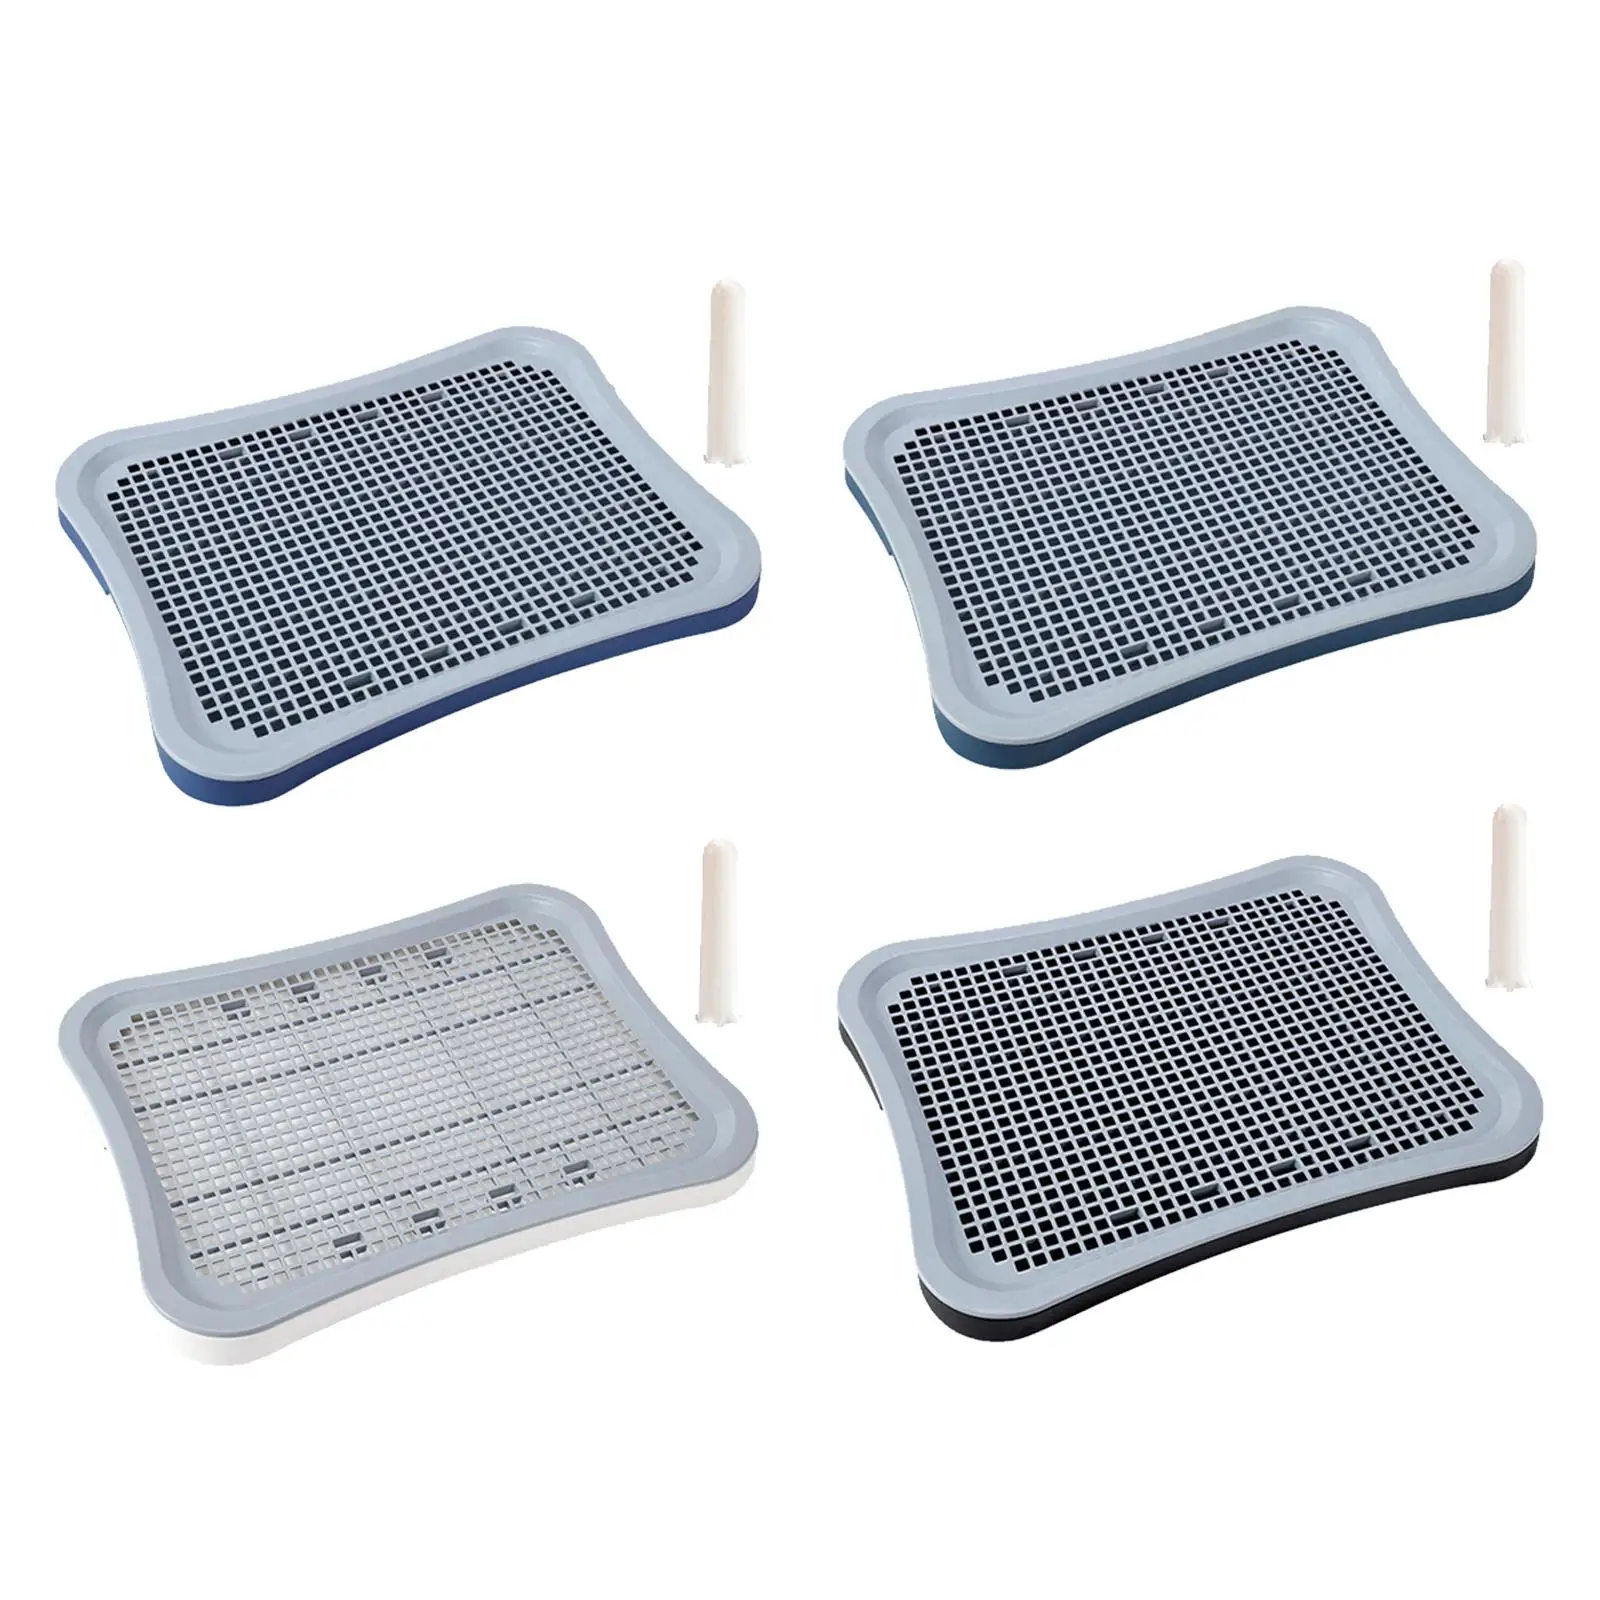 Pet Toilet Easy to Clean Litter Bedding Box Urinal Detachable Mesh Grids Bedpan Pee Pad Holder for Bunny Pets Accessories Kitten